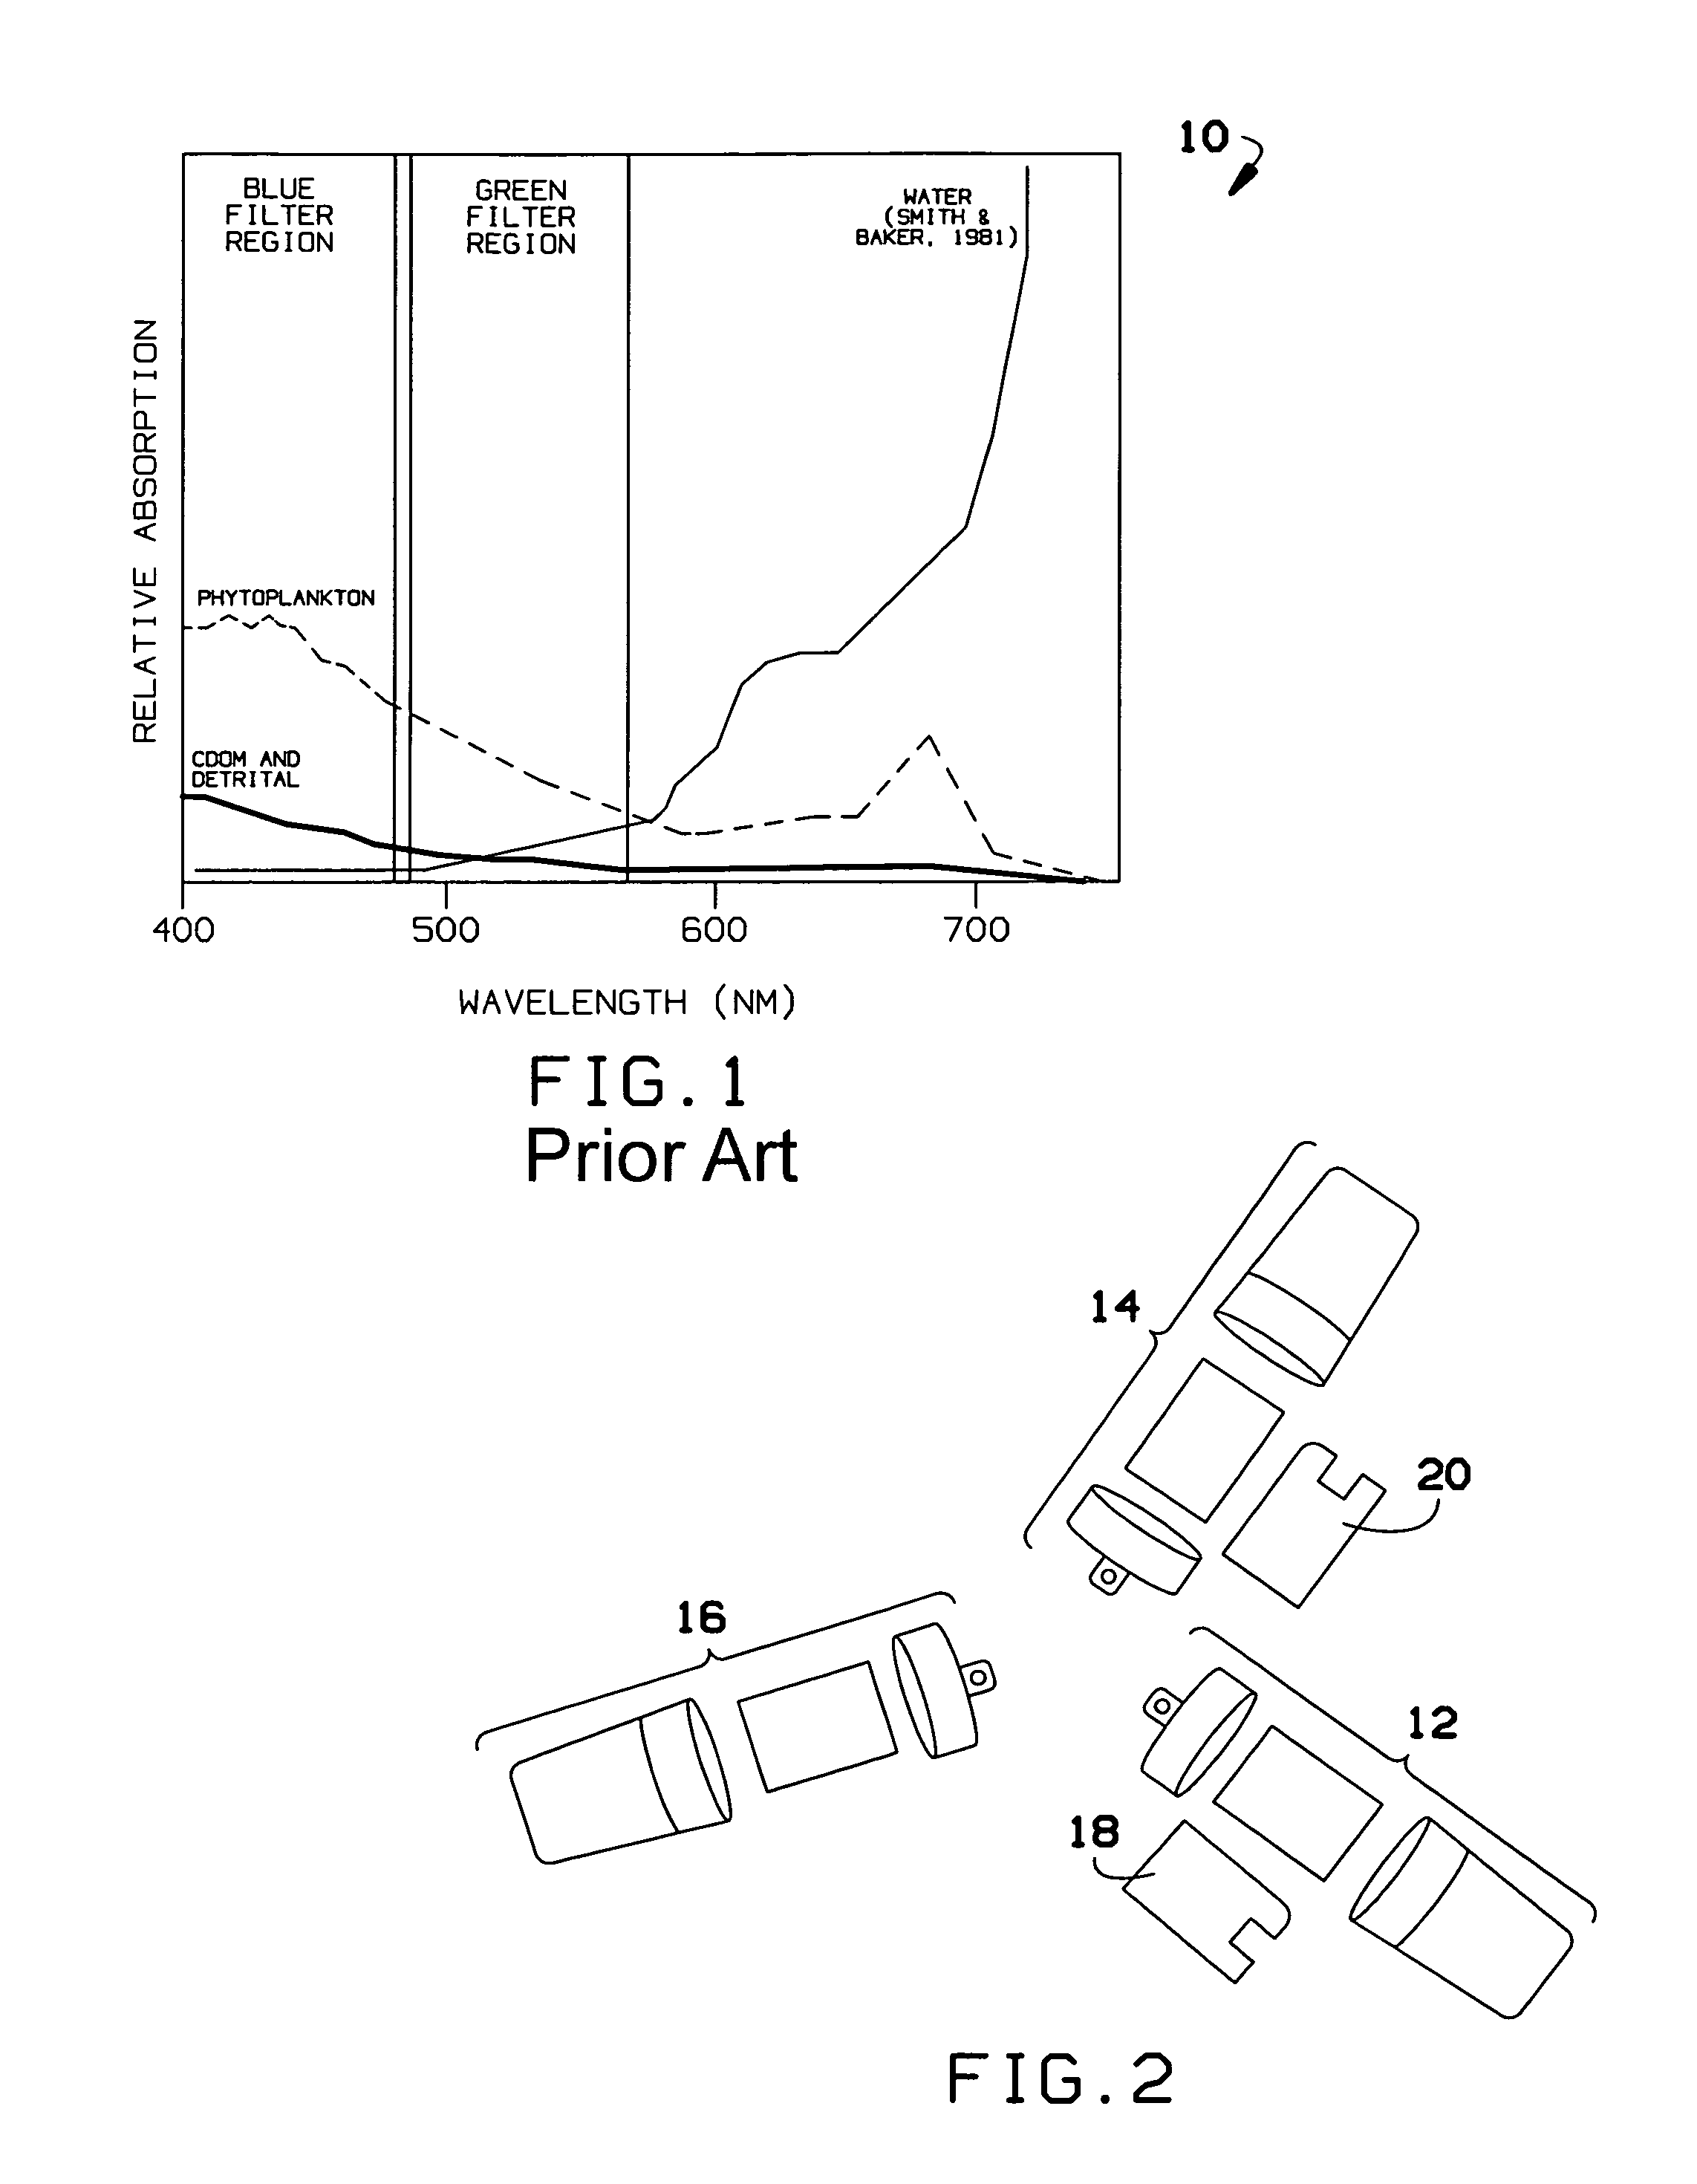 Device and process to measure water clarity and organic content